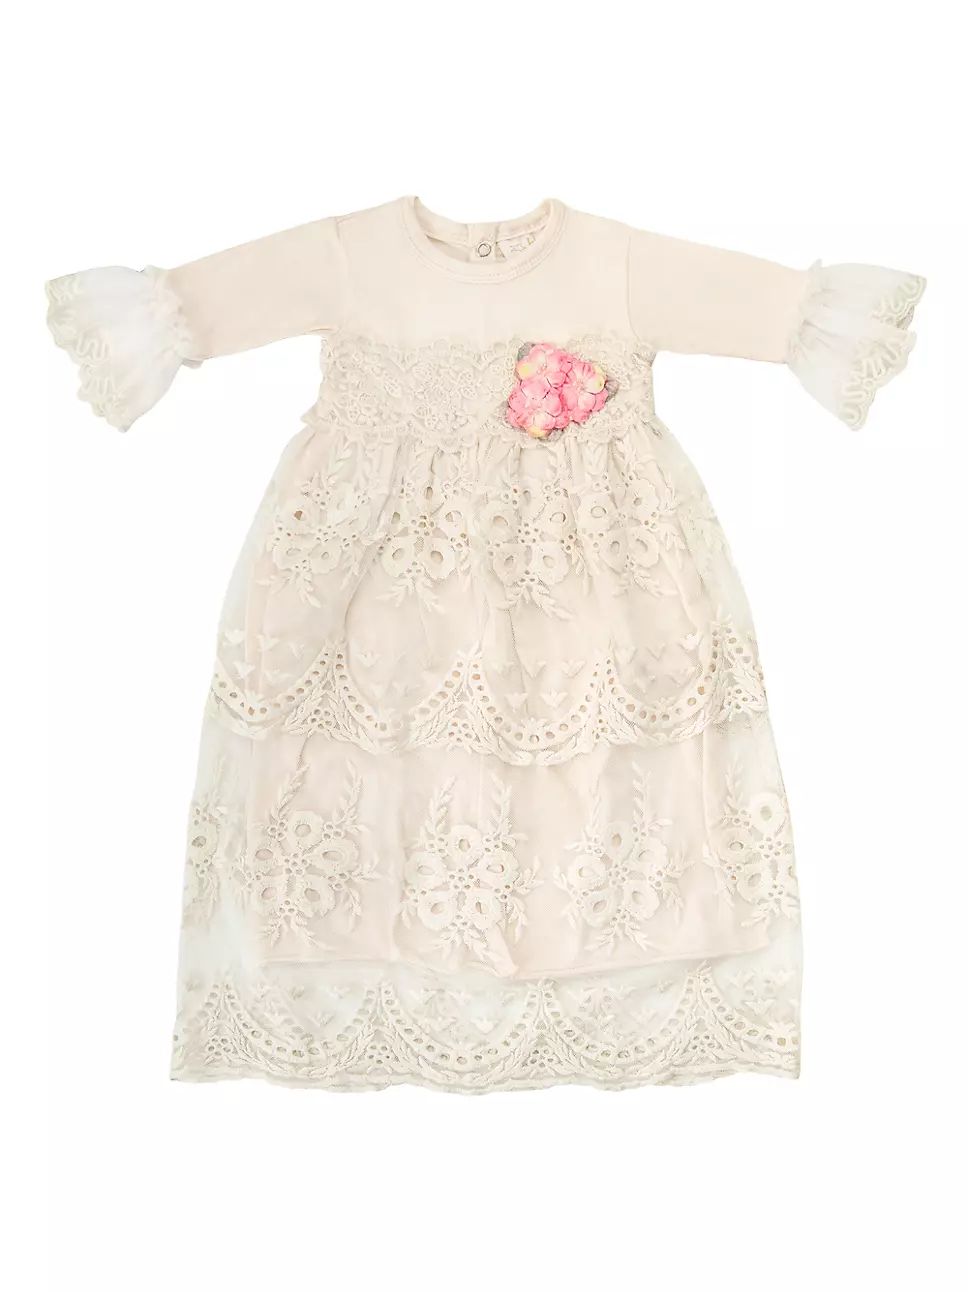 Baby Girl's Peach Blush Gown | Saks Fifth Avenue